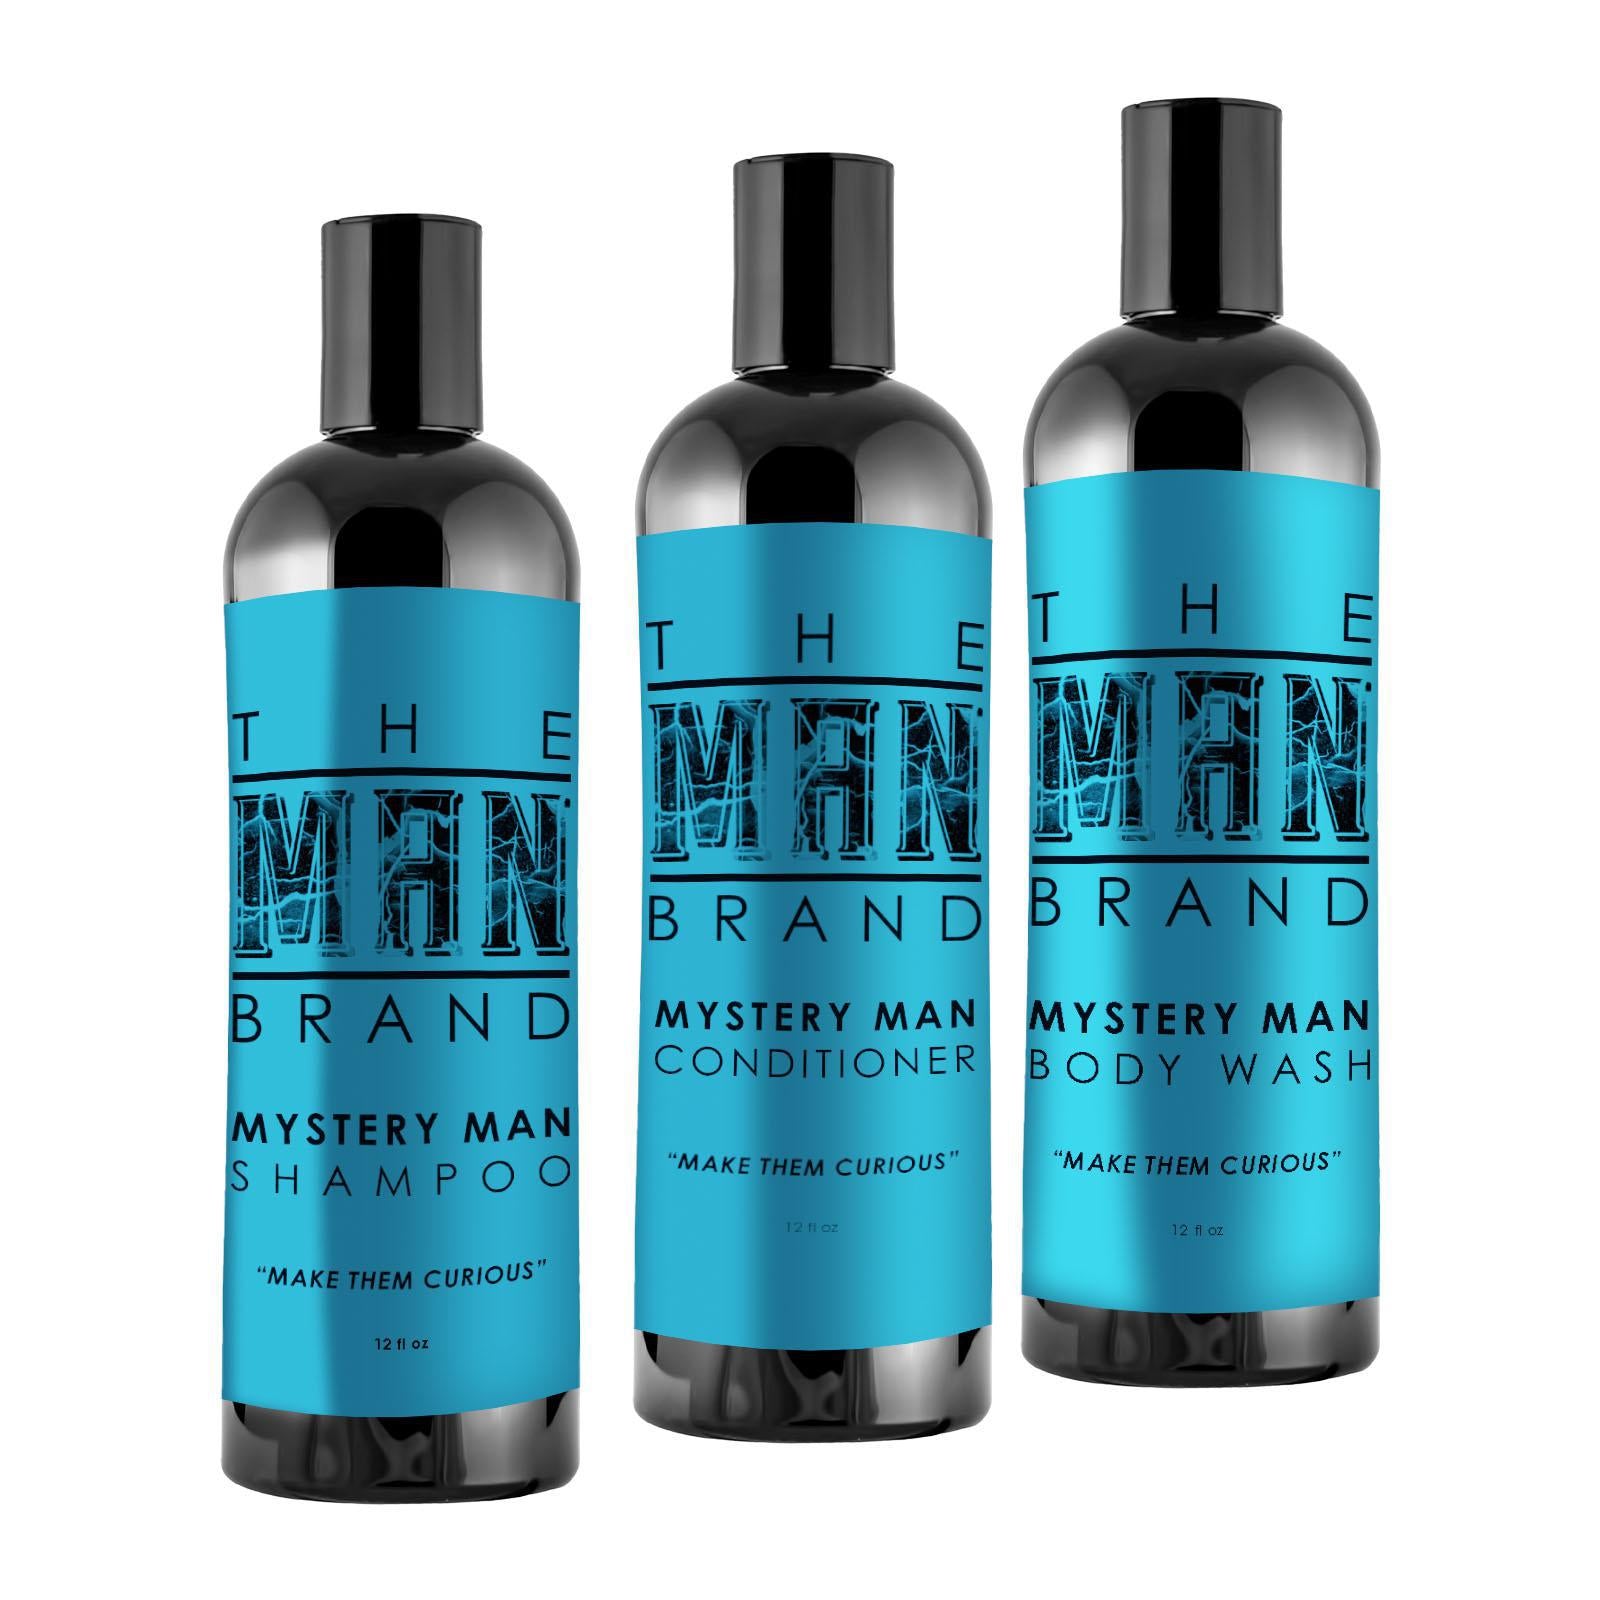 Shower Pack Men's Grooming Kit: Shampoo, Conditioner, and Body Wash